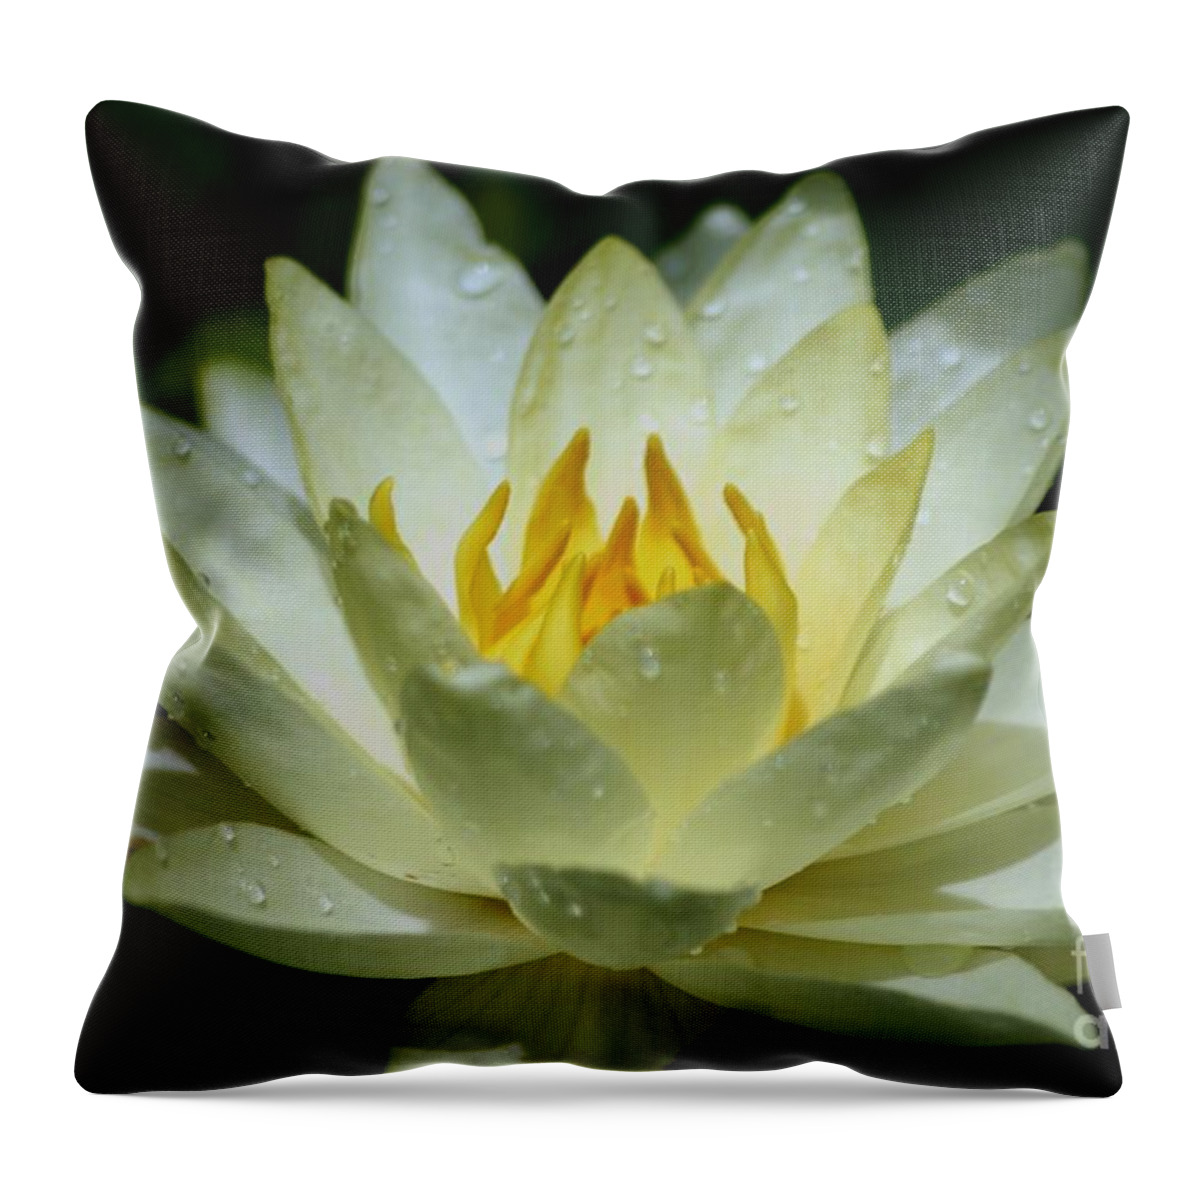 Floral Throw Pillow featuring the photograph Sunshine Water Lily by Living Color Photography Lorraine Lynch